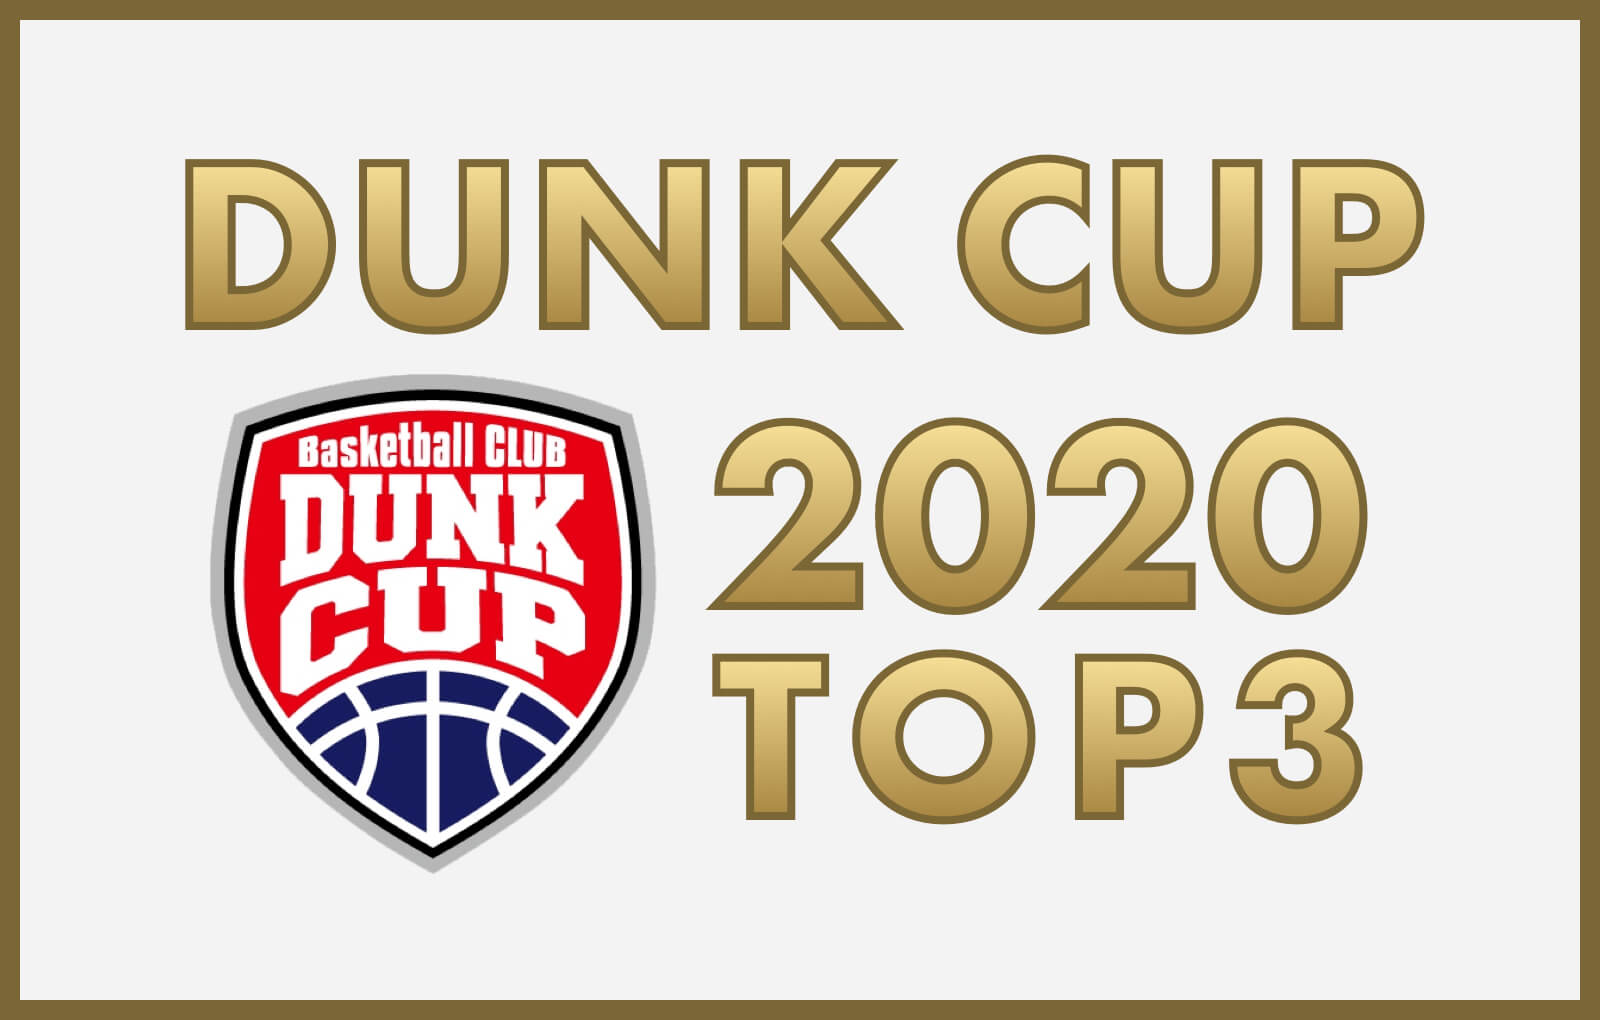 DUNK CUP 2020 TOP3 結果発表!!